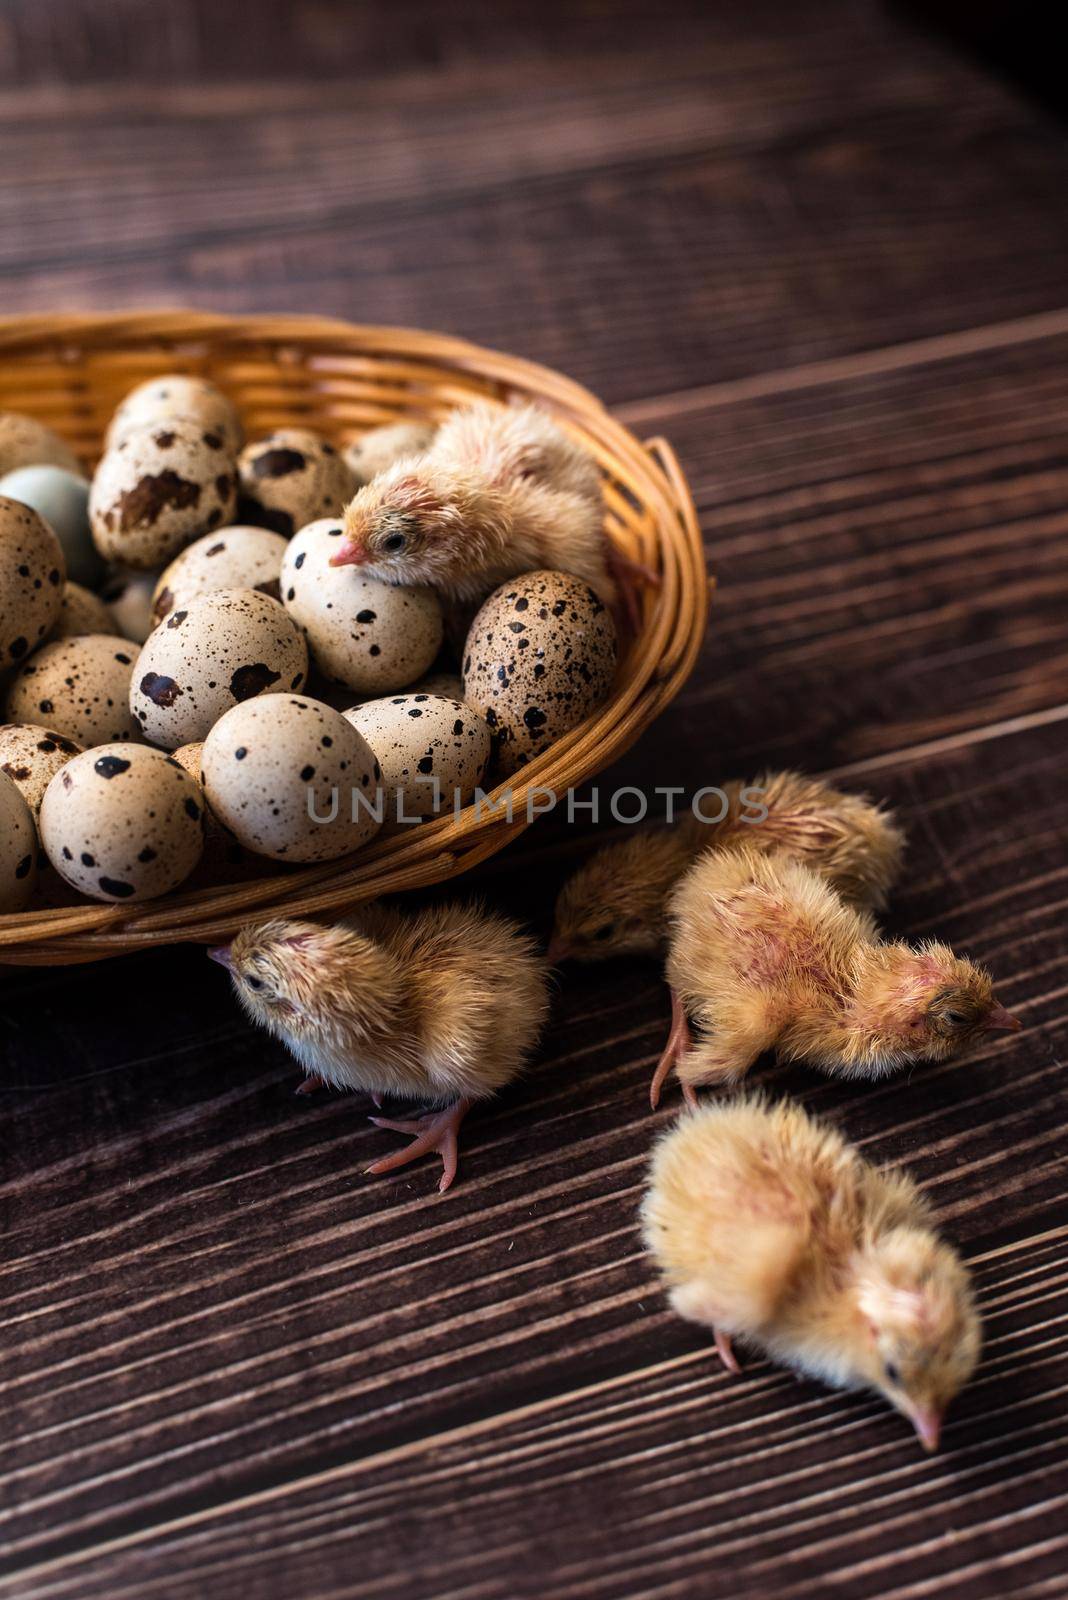 Newborn yellow baby chicks. The chick hatched from the egg. Chickens together with eggs background for poultry farm